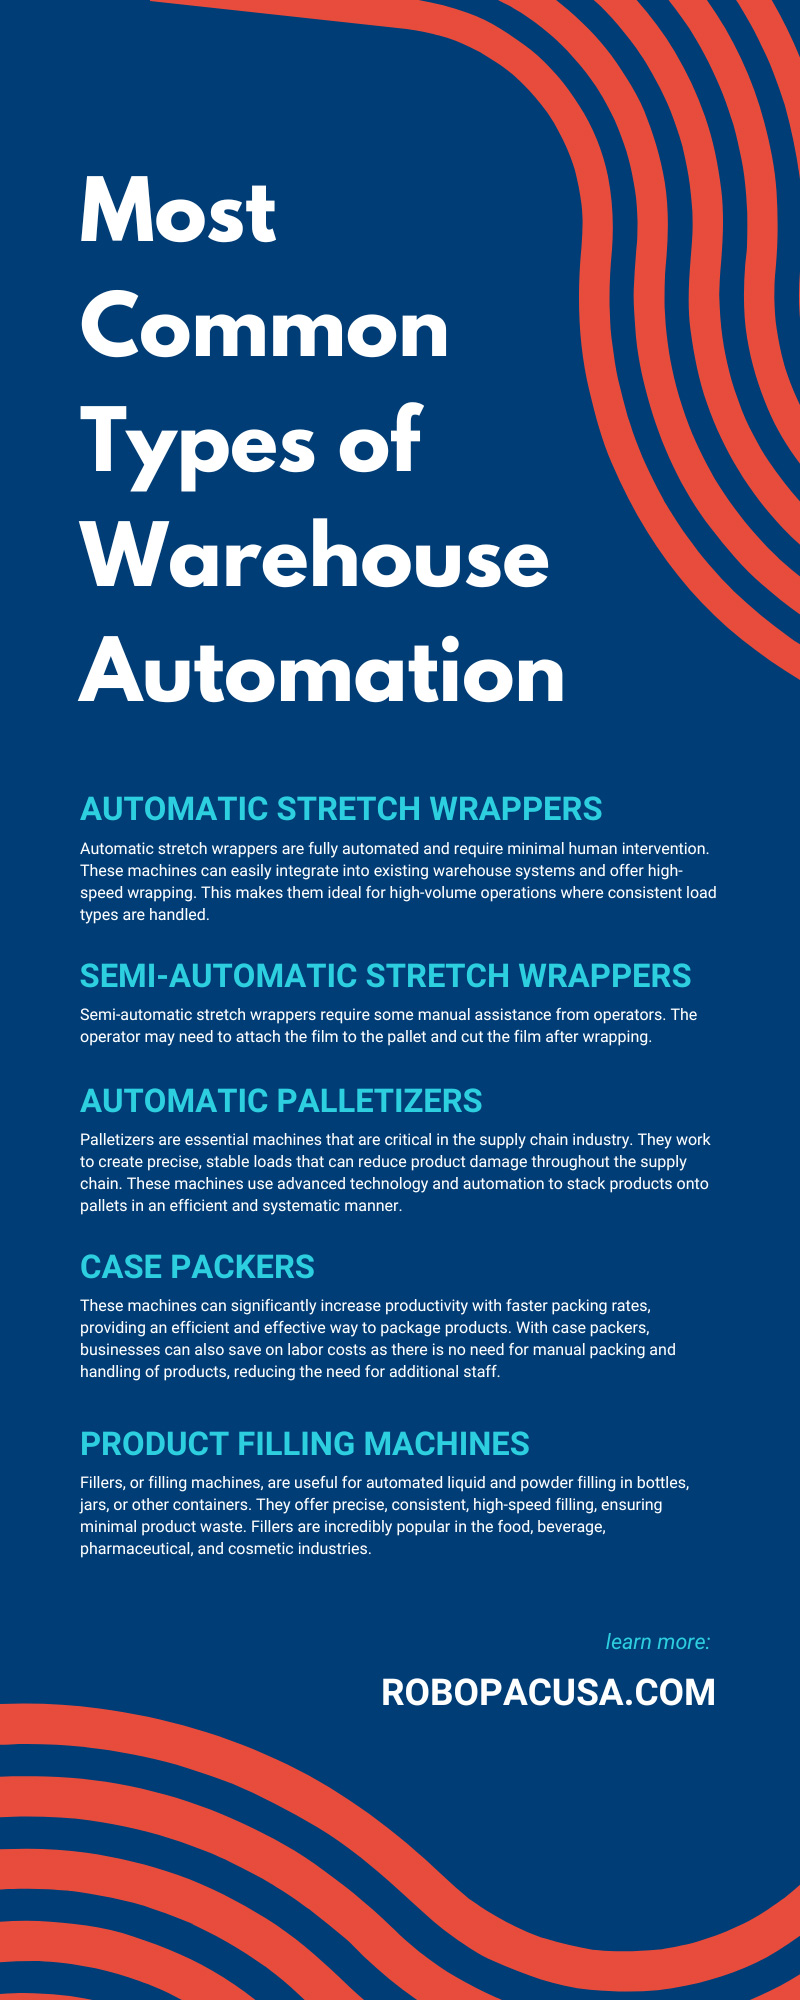 Most Common Types of Warehouse Automation